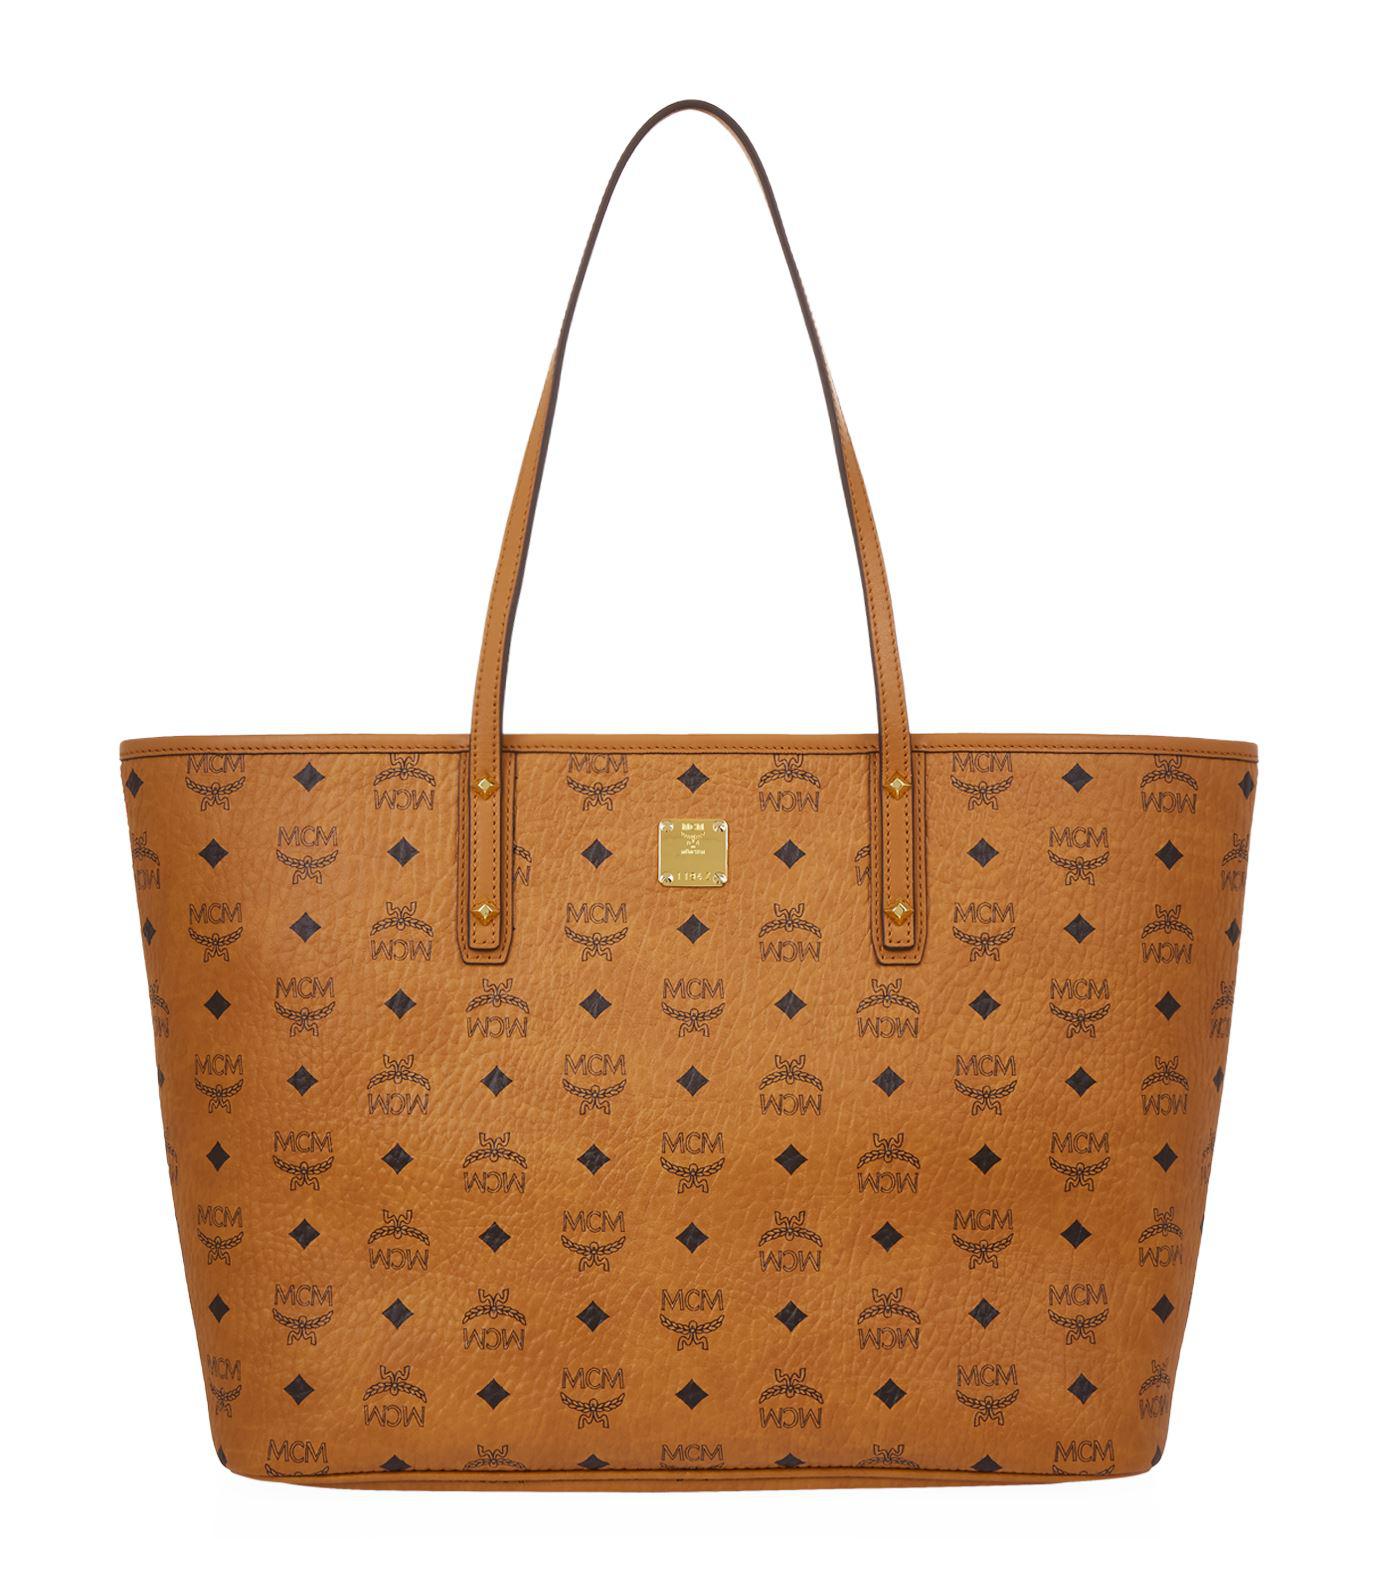 Lyst - Mcm Diamonds Leather Tote Bag in Brown